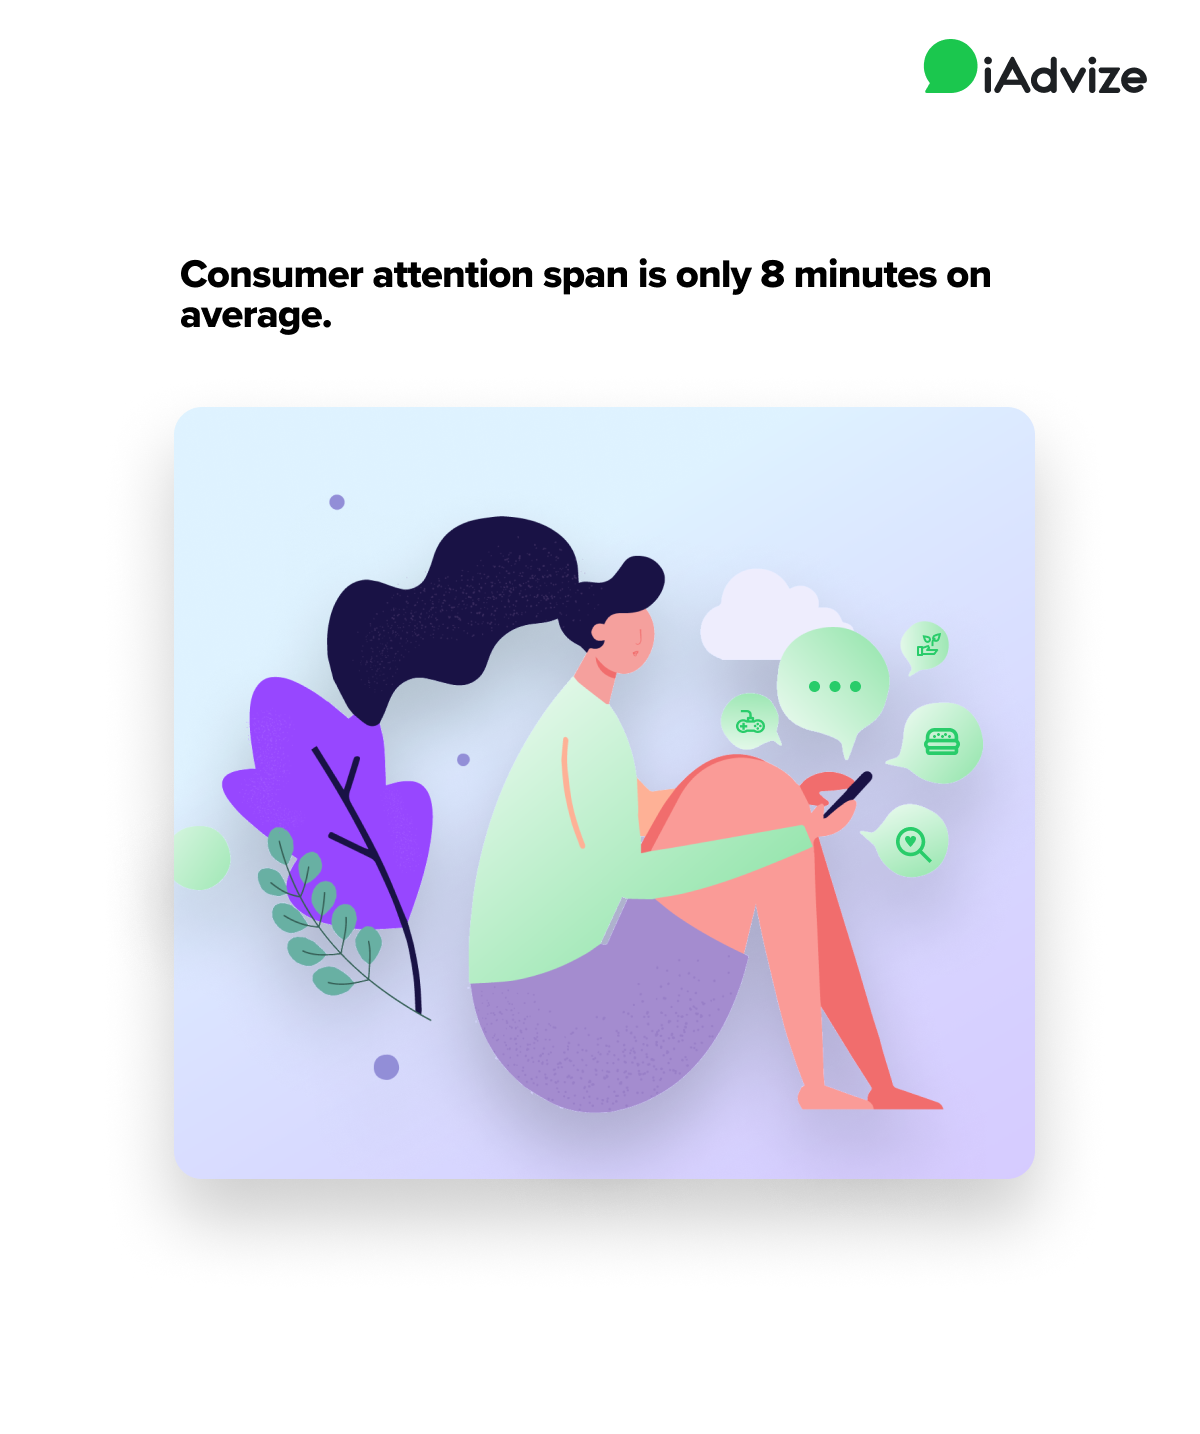 Graphic - header: "Consumer attention span is only 8 minutes on average" above graphic of woman with long hair on cell phone with emojis of activities (chat bubble, food, search, games)